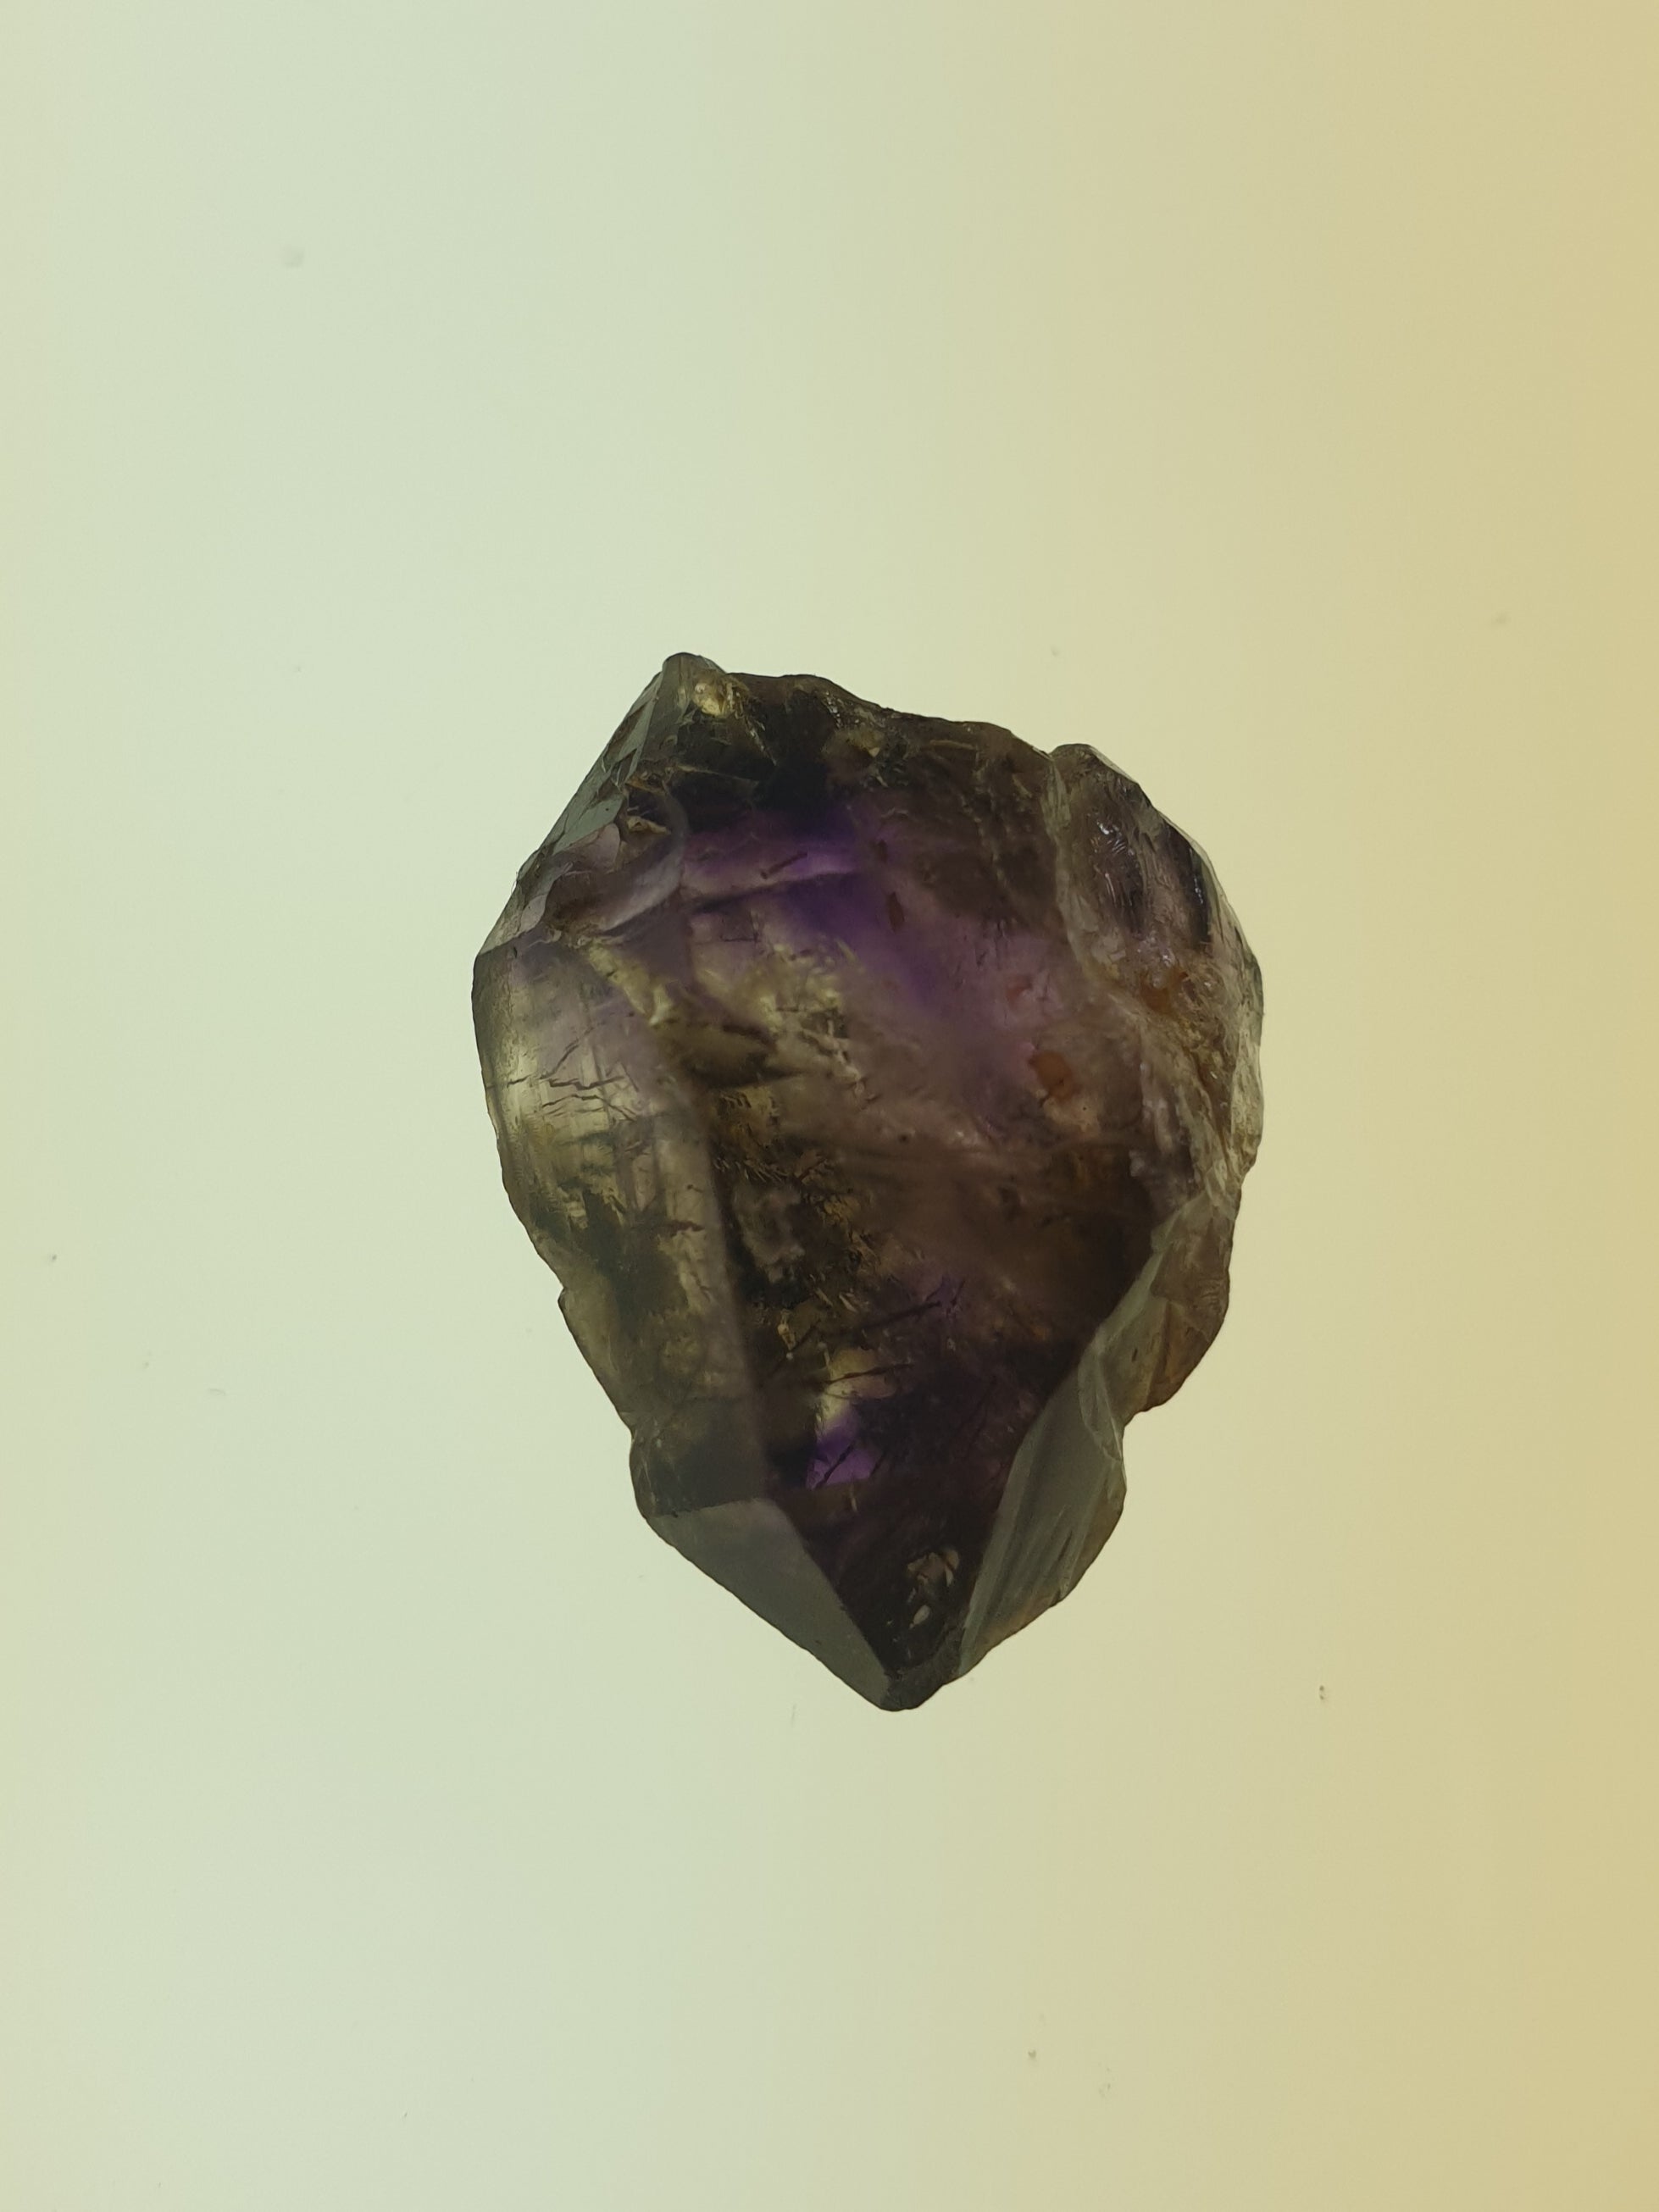 Super seven Amethyst - Double terminated point - 6g